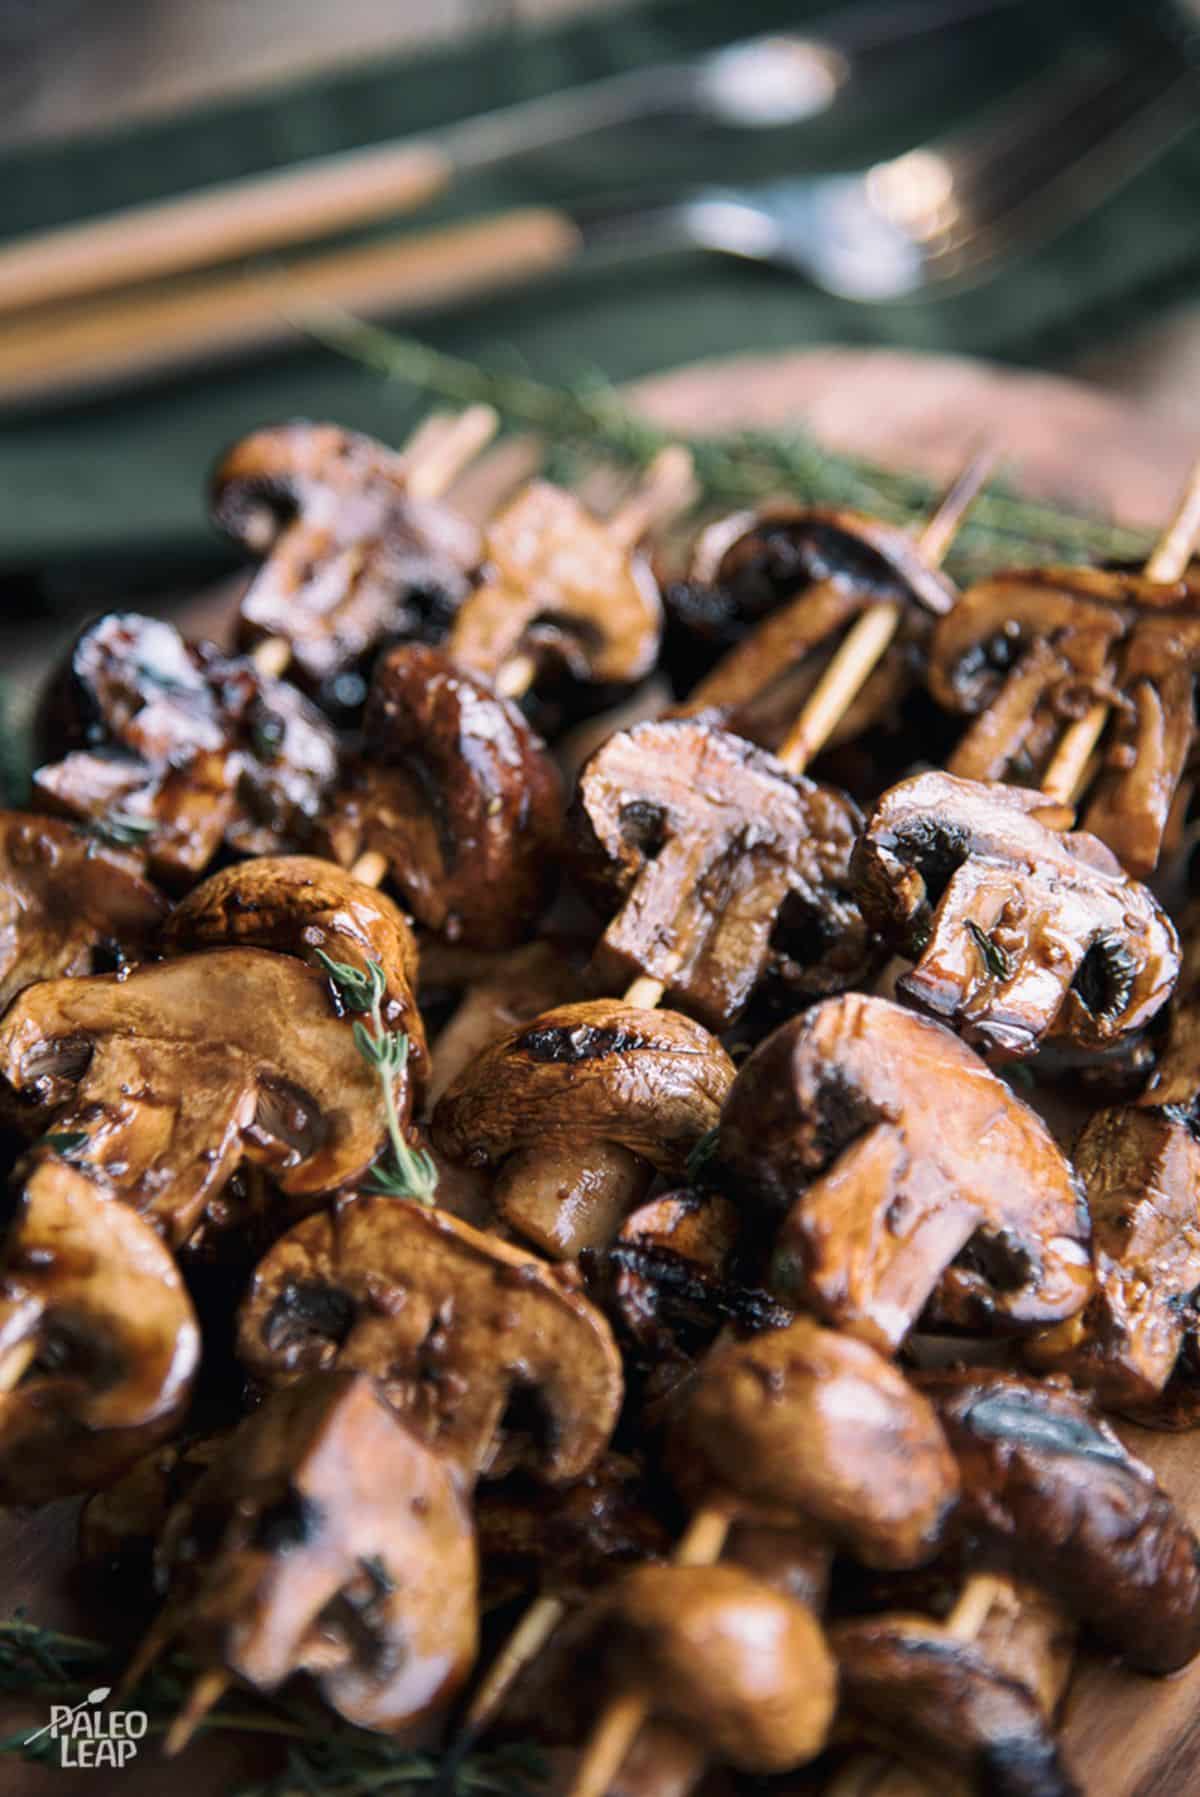 Grilled Mushroom Skewers With Balsamic Sauce